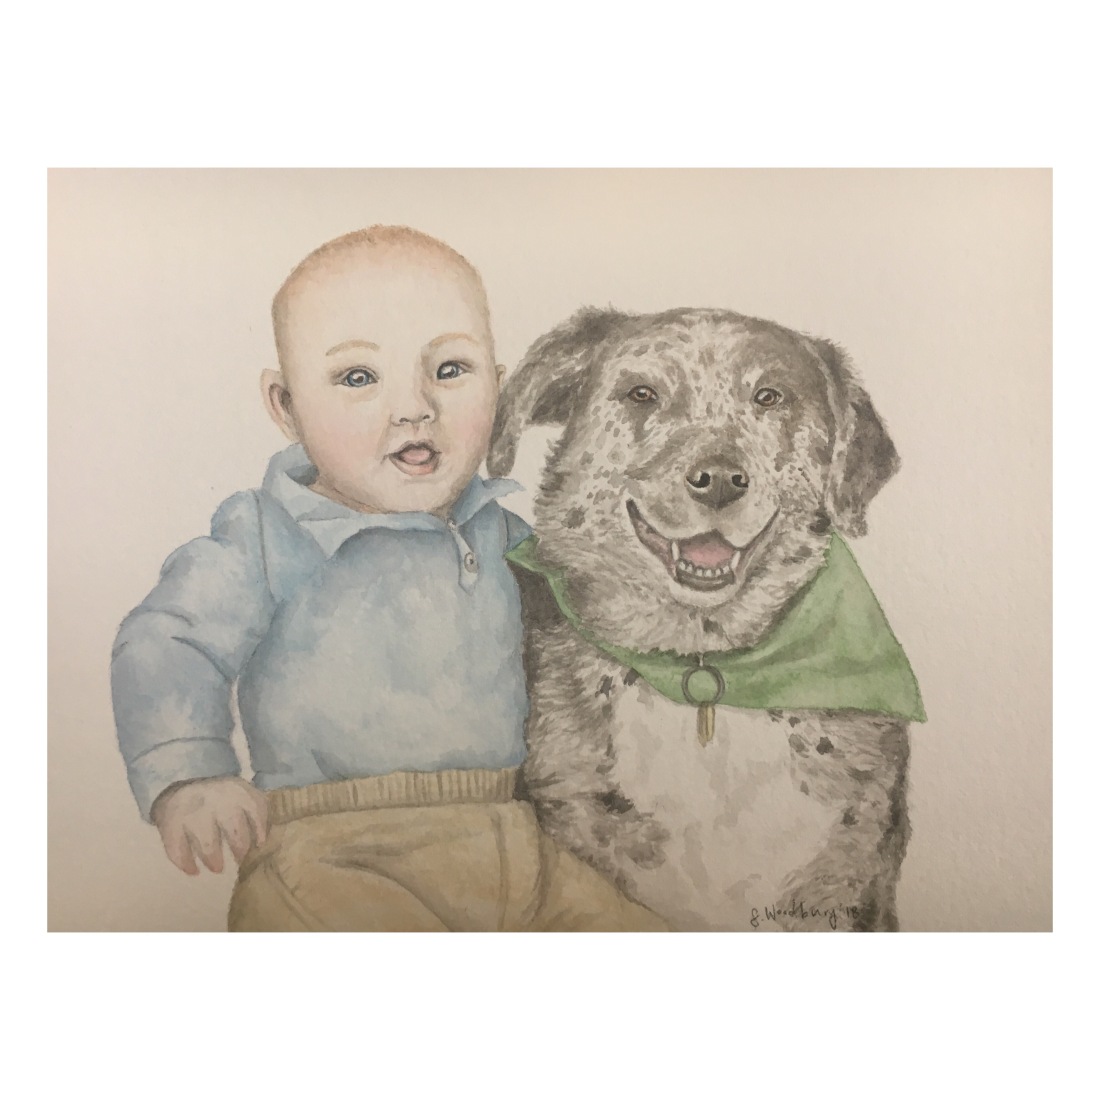 A painting of a baby and a spotted dog sitting close together and both smiling.